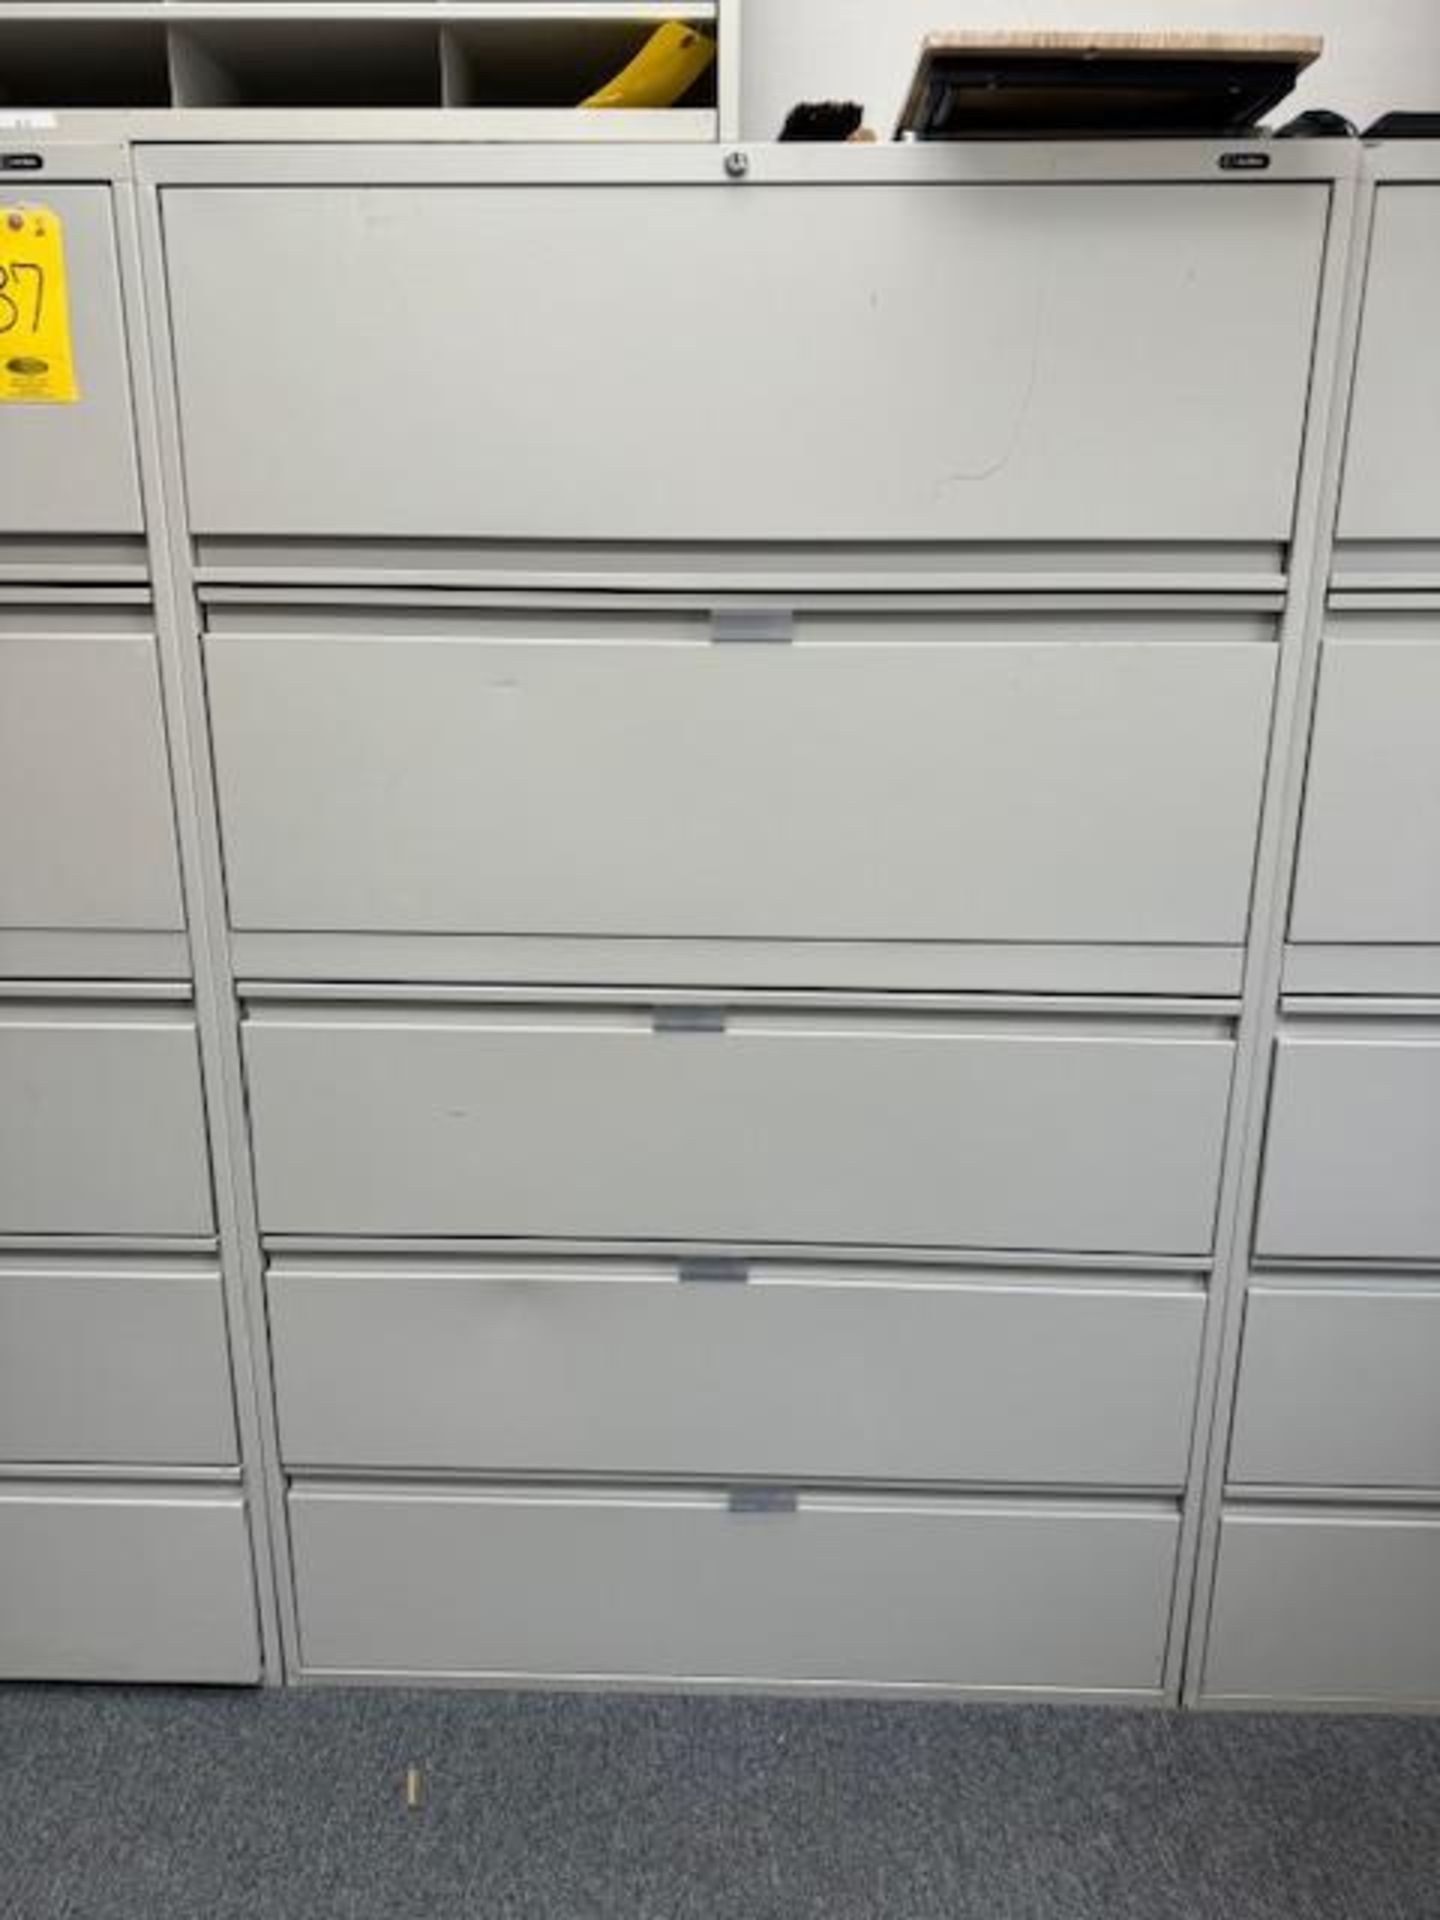 (2) GLOBAL 42 IN. 5-DRAWER LATERAL FILES (Located in Willow Grove, PA) - Image 2 of 2